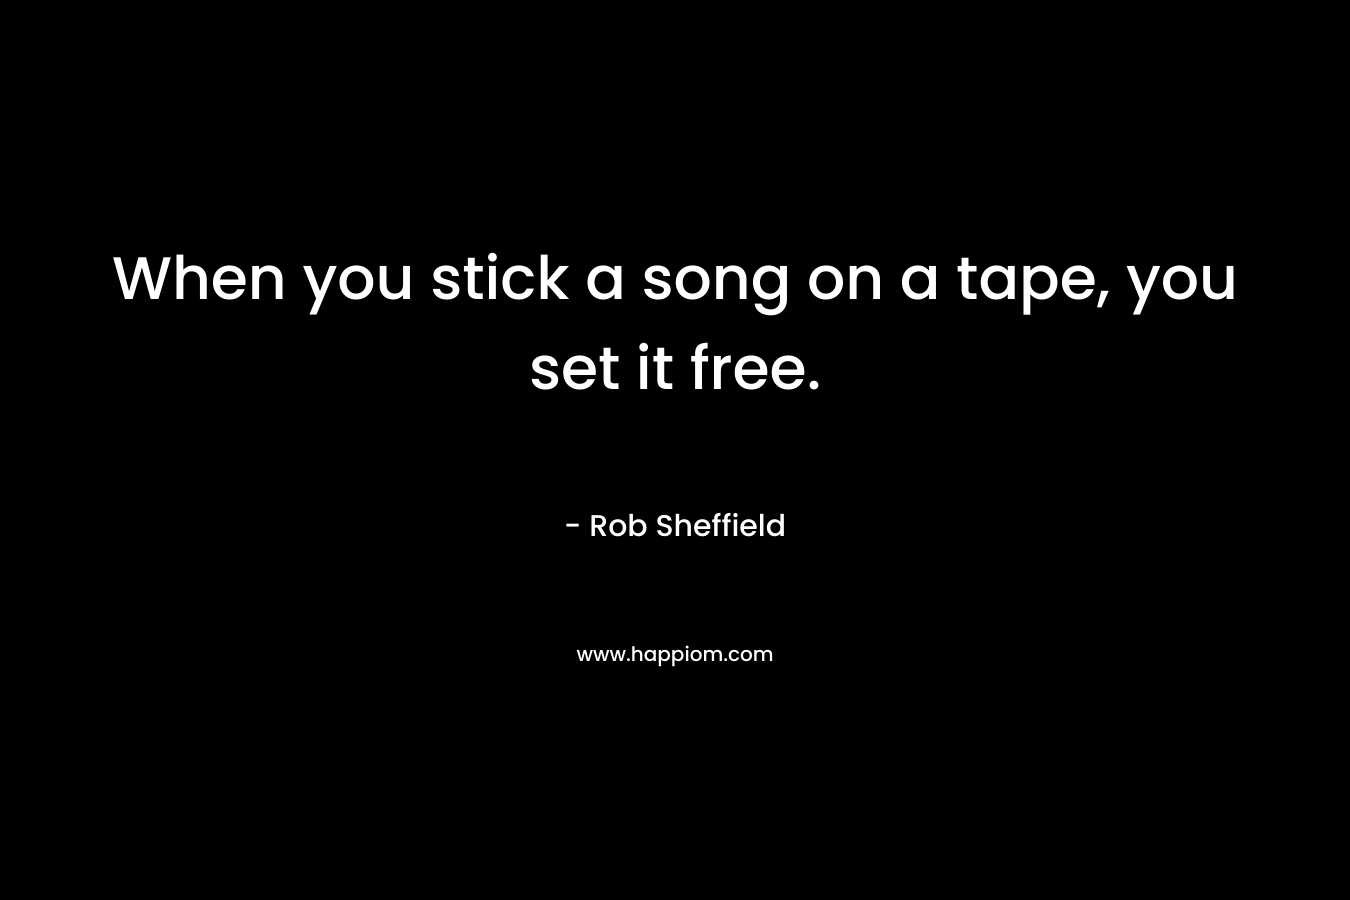 When you stick a song on a tape, you set it free.